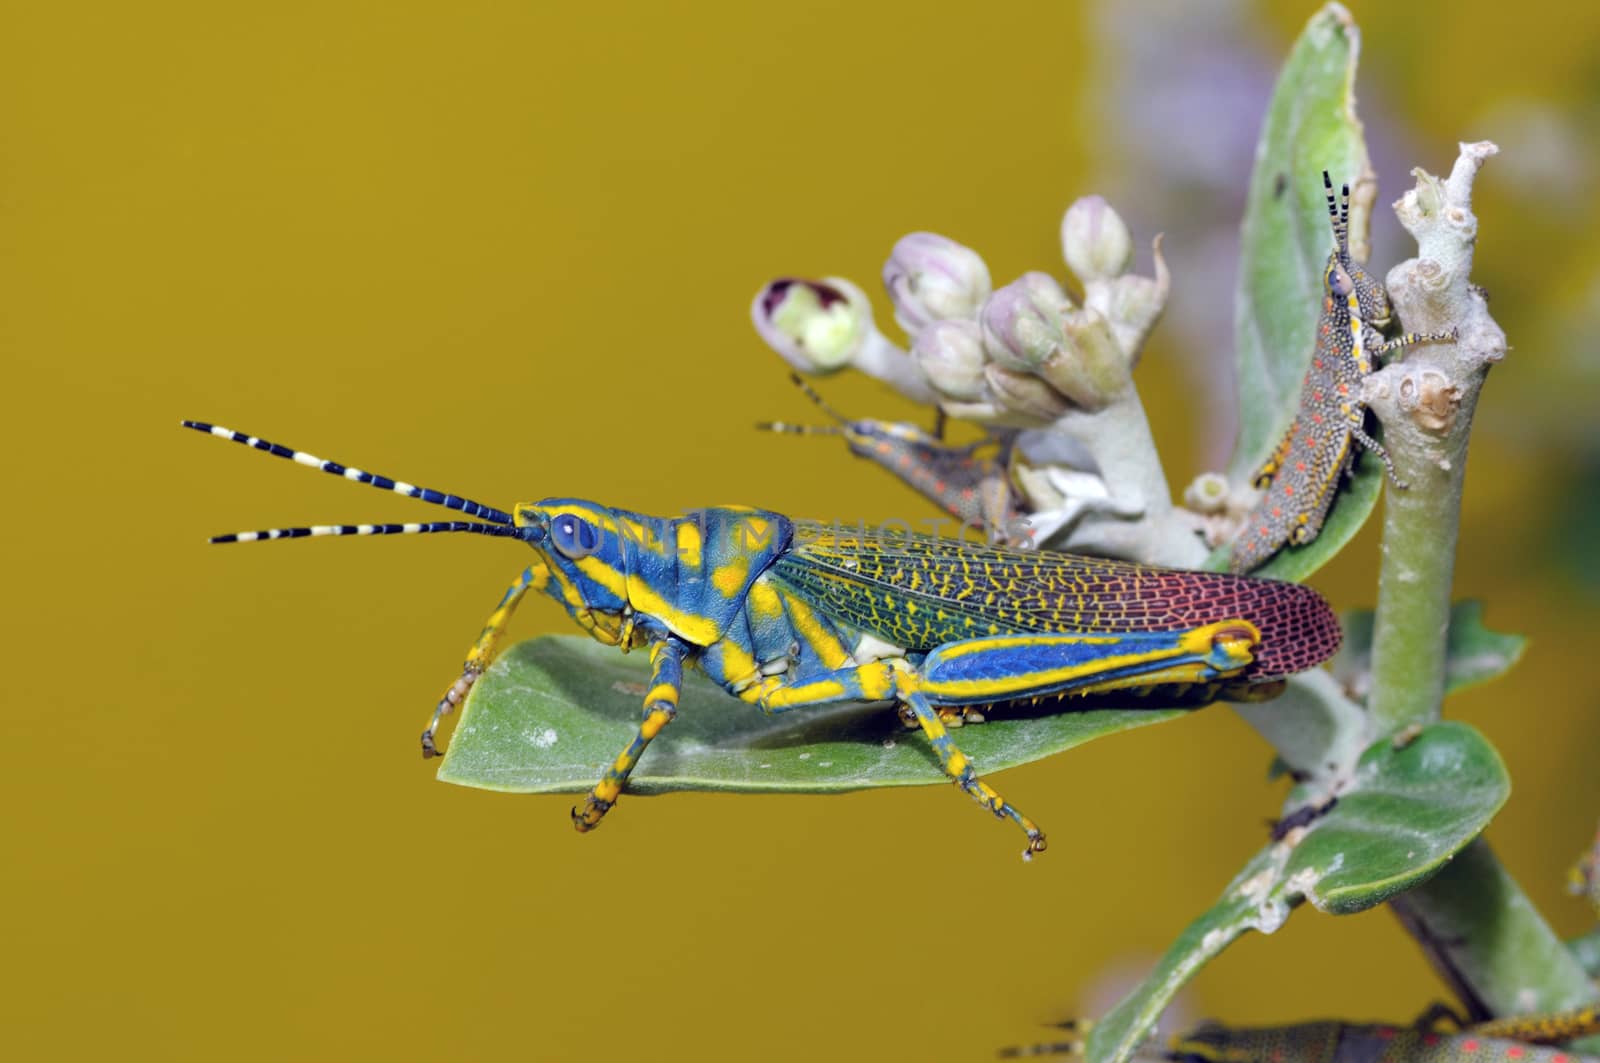 A painted grasshopper perching on a green leaf